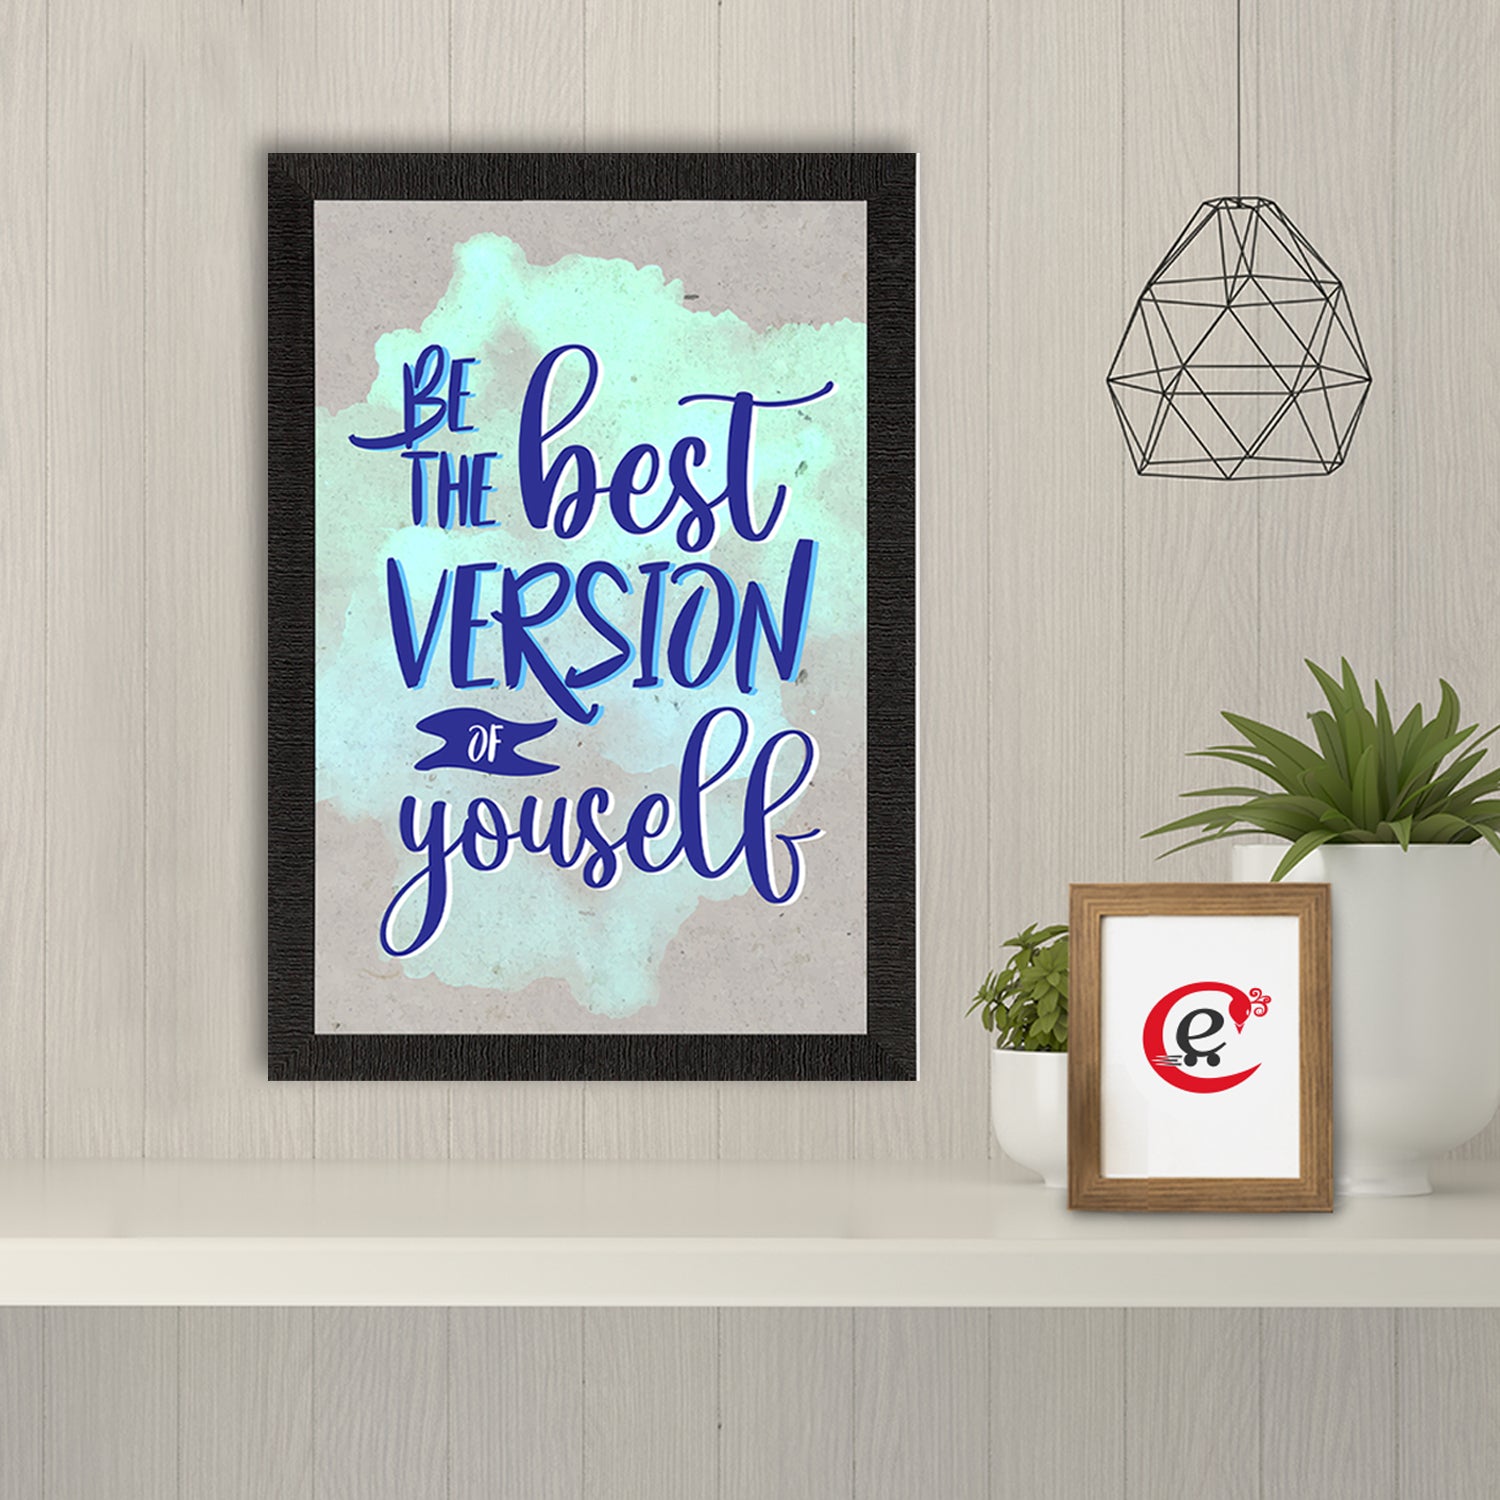 "Be the best version of yourself" Motivational Quote Satin Matt Texture UV Art Painting 1